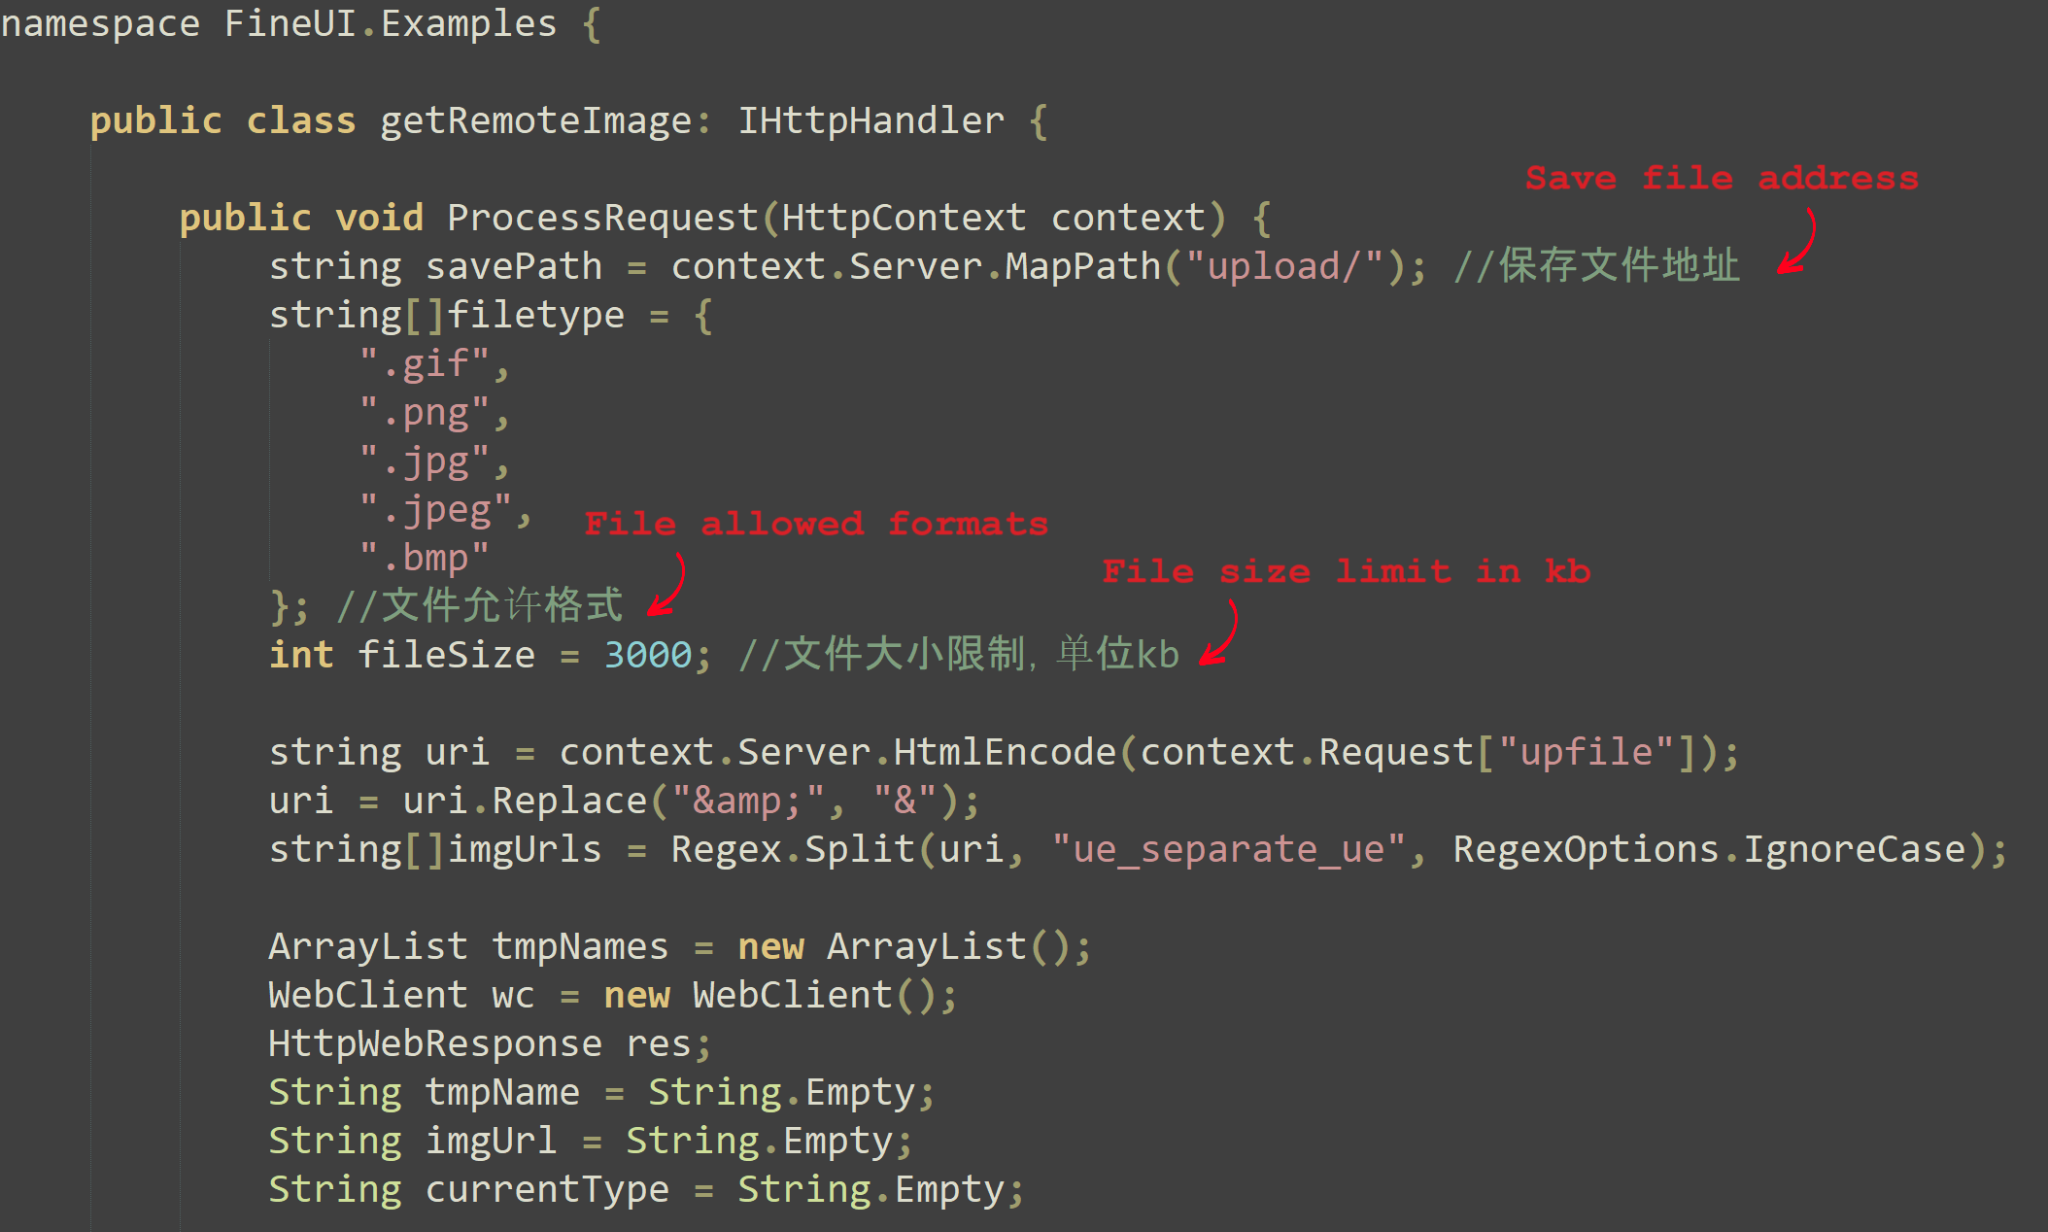 Image 16 is a screenshot of many lines of code. Three lines are indicated by arrows that contain Chinese characters. From top to bottom: Save file address. File allowed formats. File size limit in KB. 